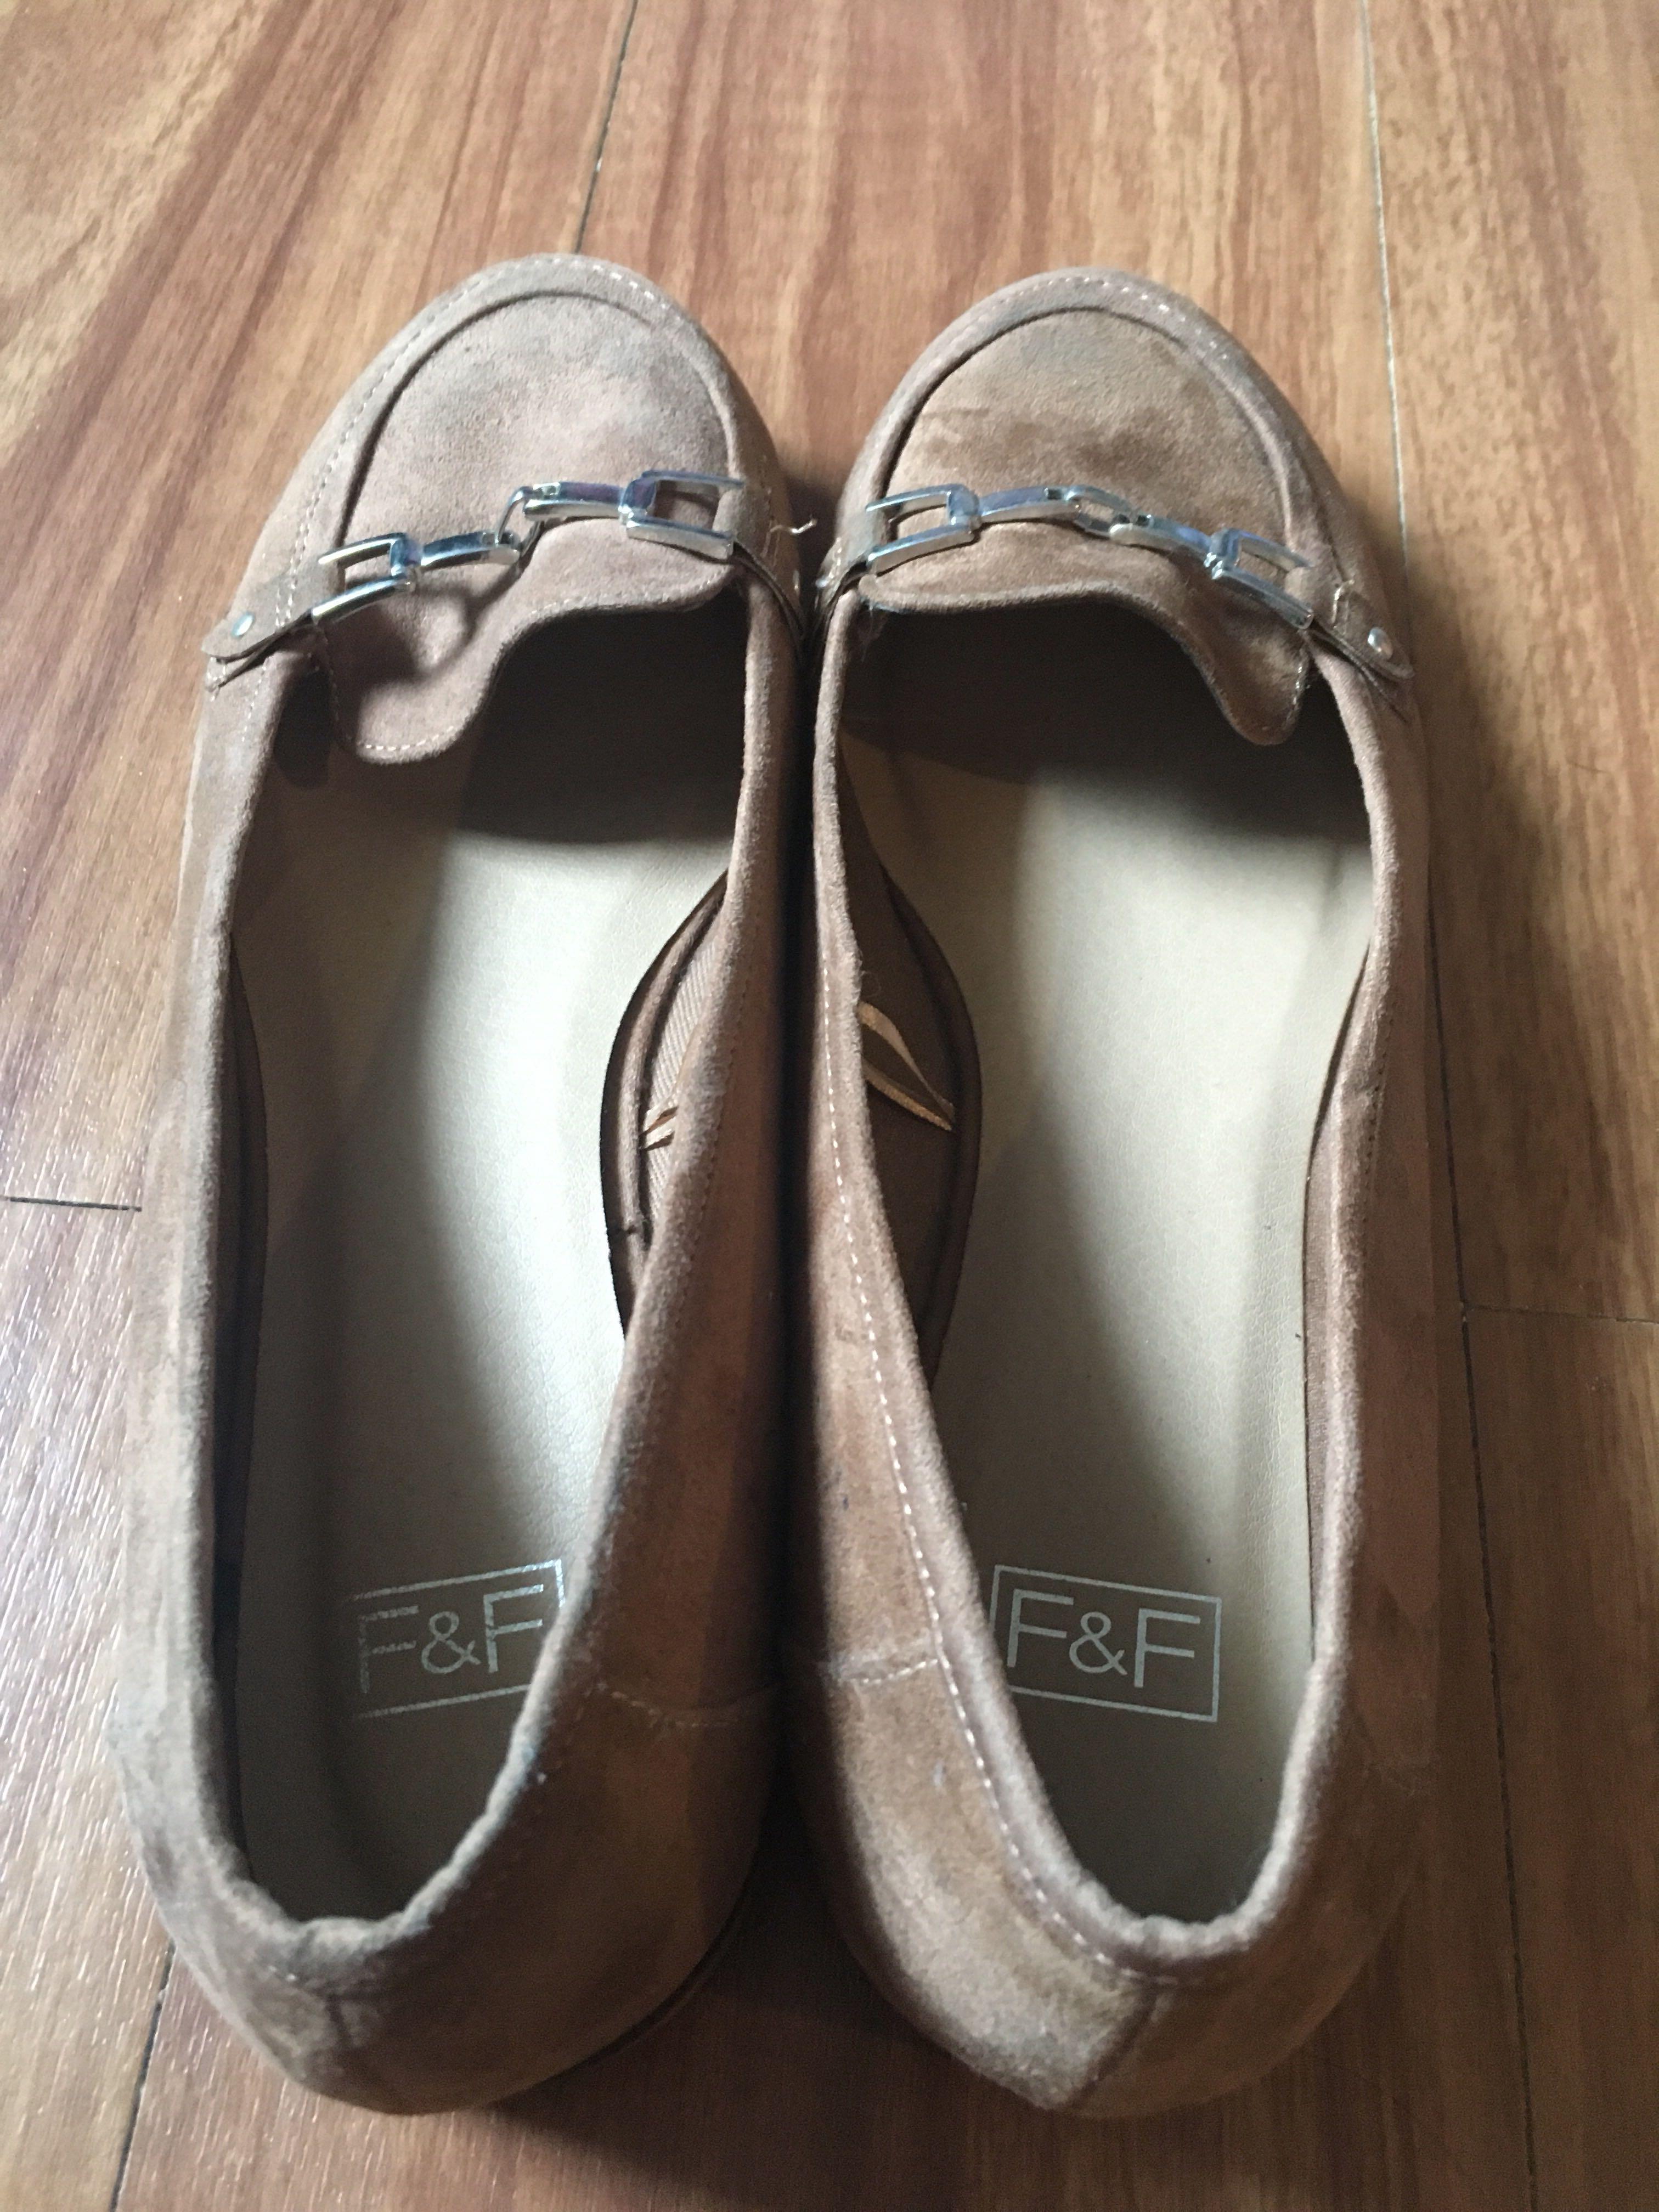 f&f loafers